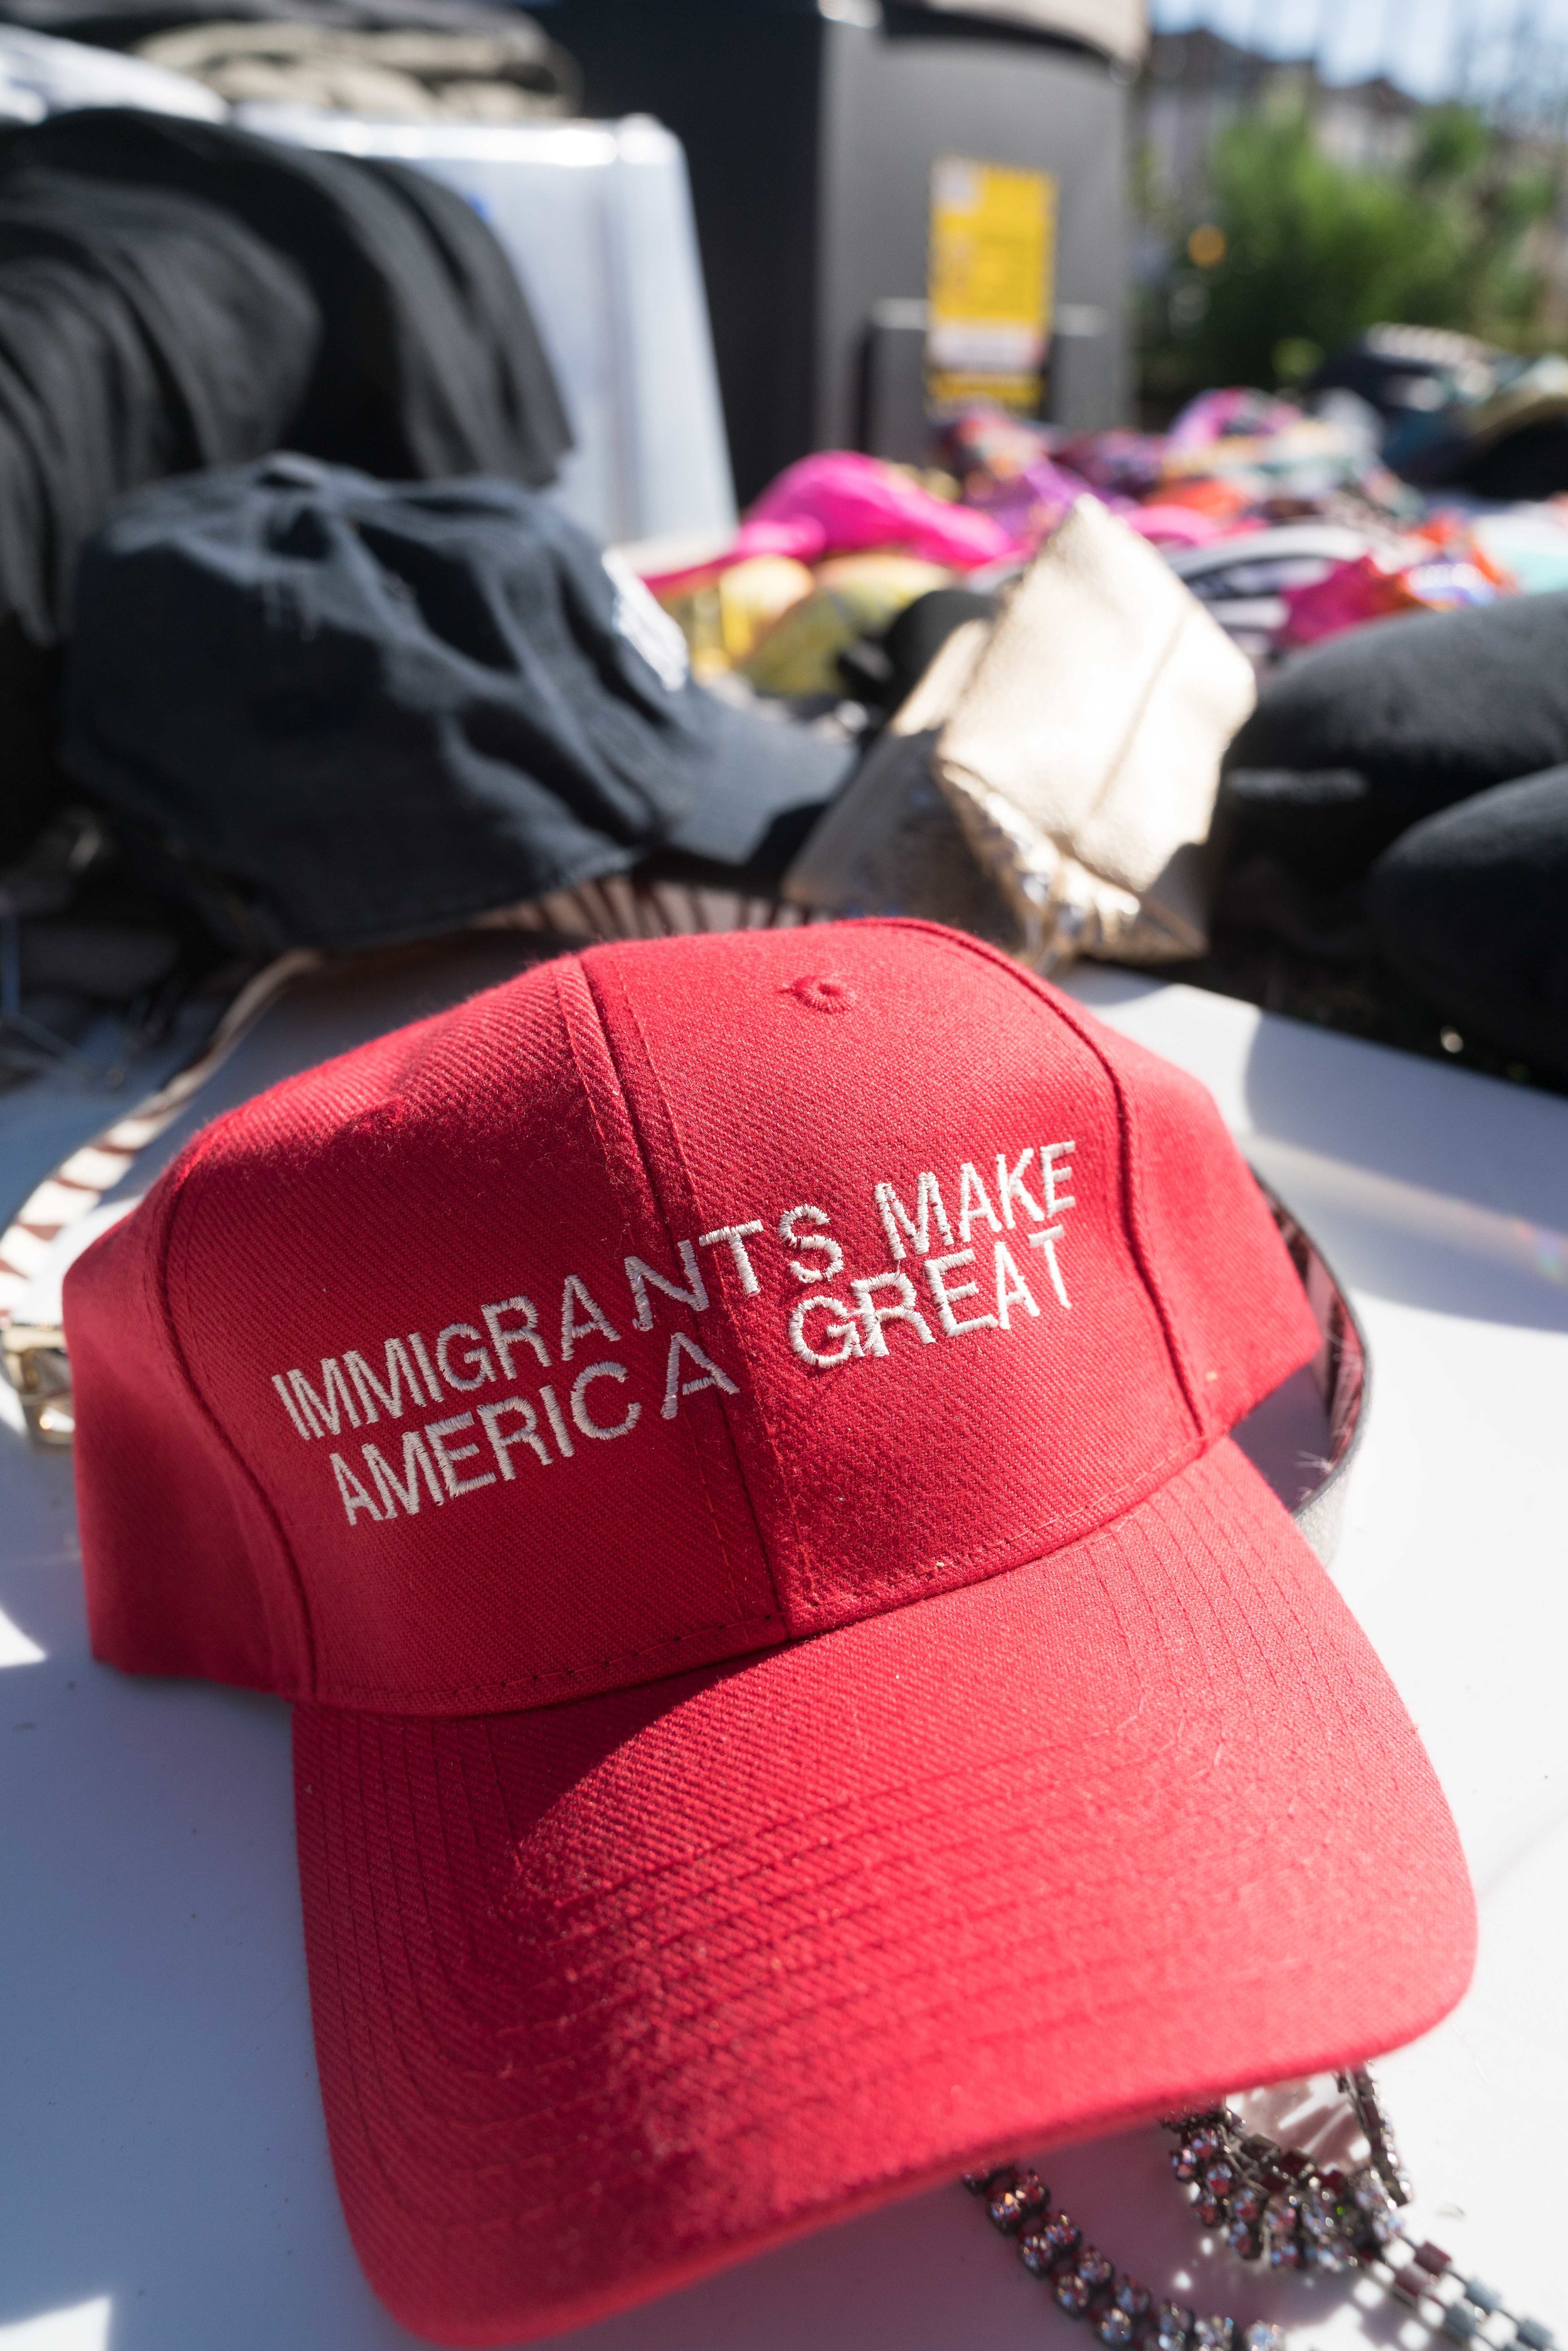  A hat for sale at a yard sale held by Santa Monica College student and DACA recipient and activist Salma Morales Aguilar in Los Angeles, Calif. on Saturday, October 21, 2017. Aguilar Morales held the yard sale to raise money to send to residents of 